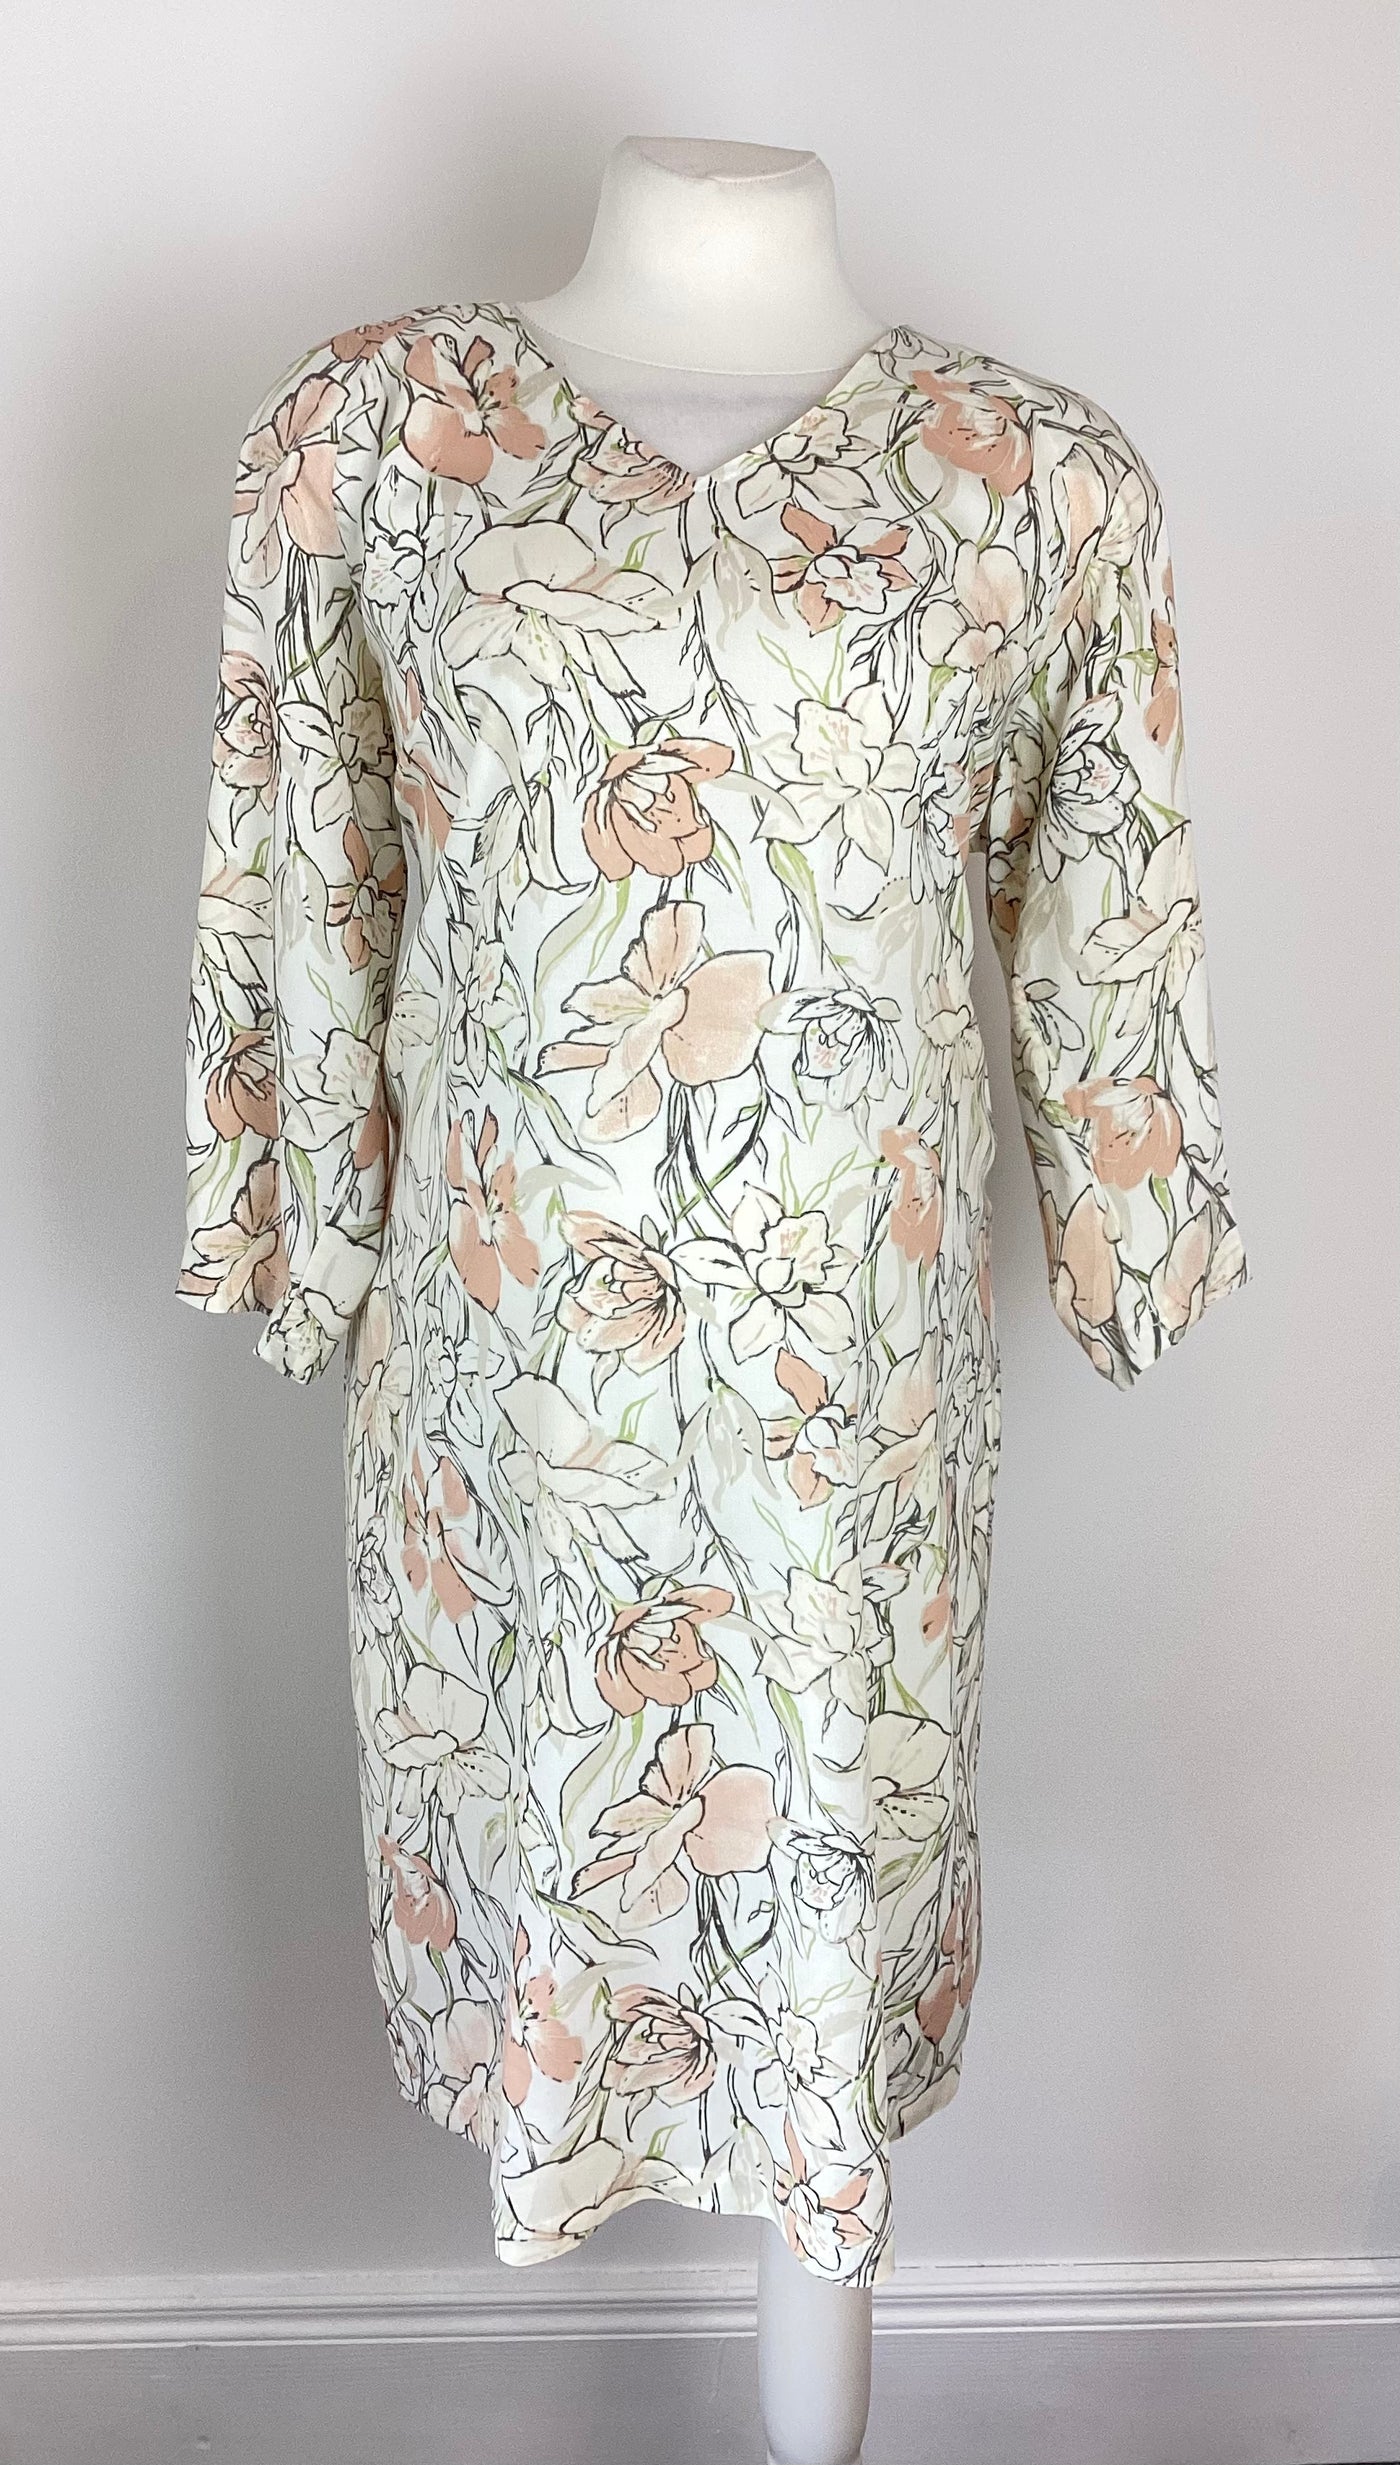 Mamalicious Cream, Pink & Green Floral 3/4 Sleeve Dress - Size L (Approx UK 14)